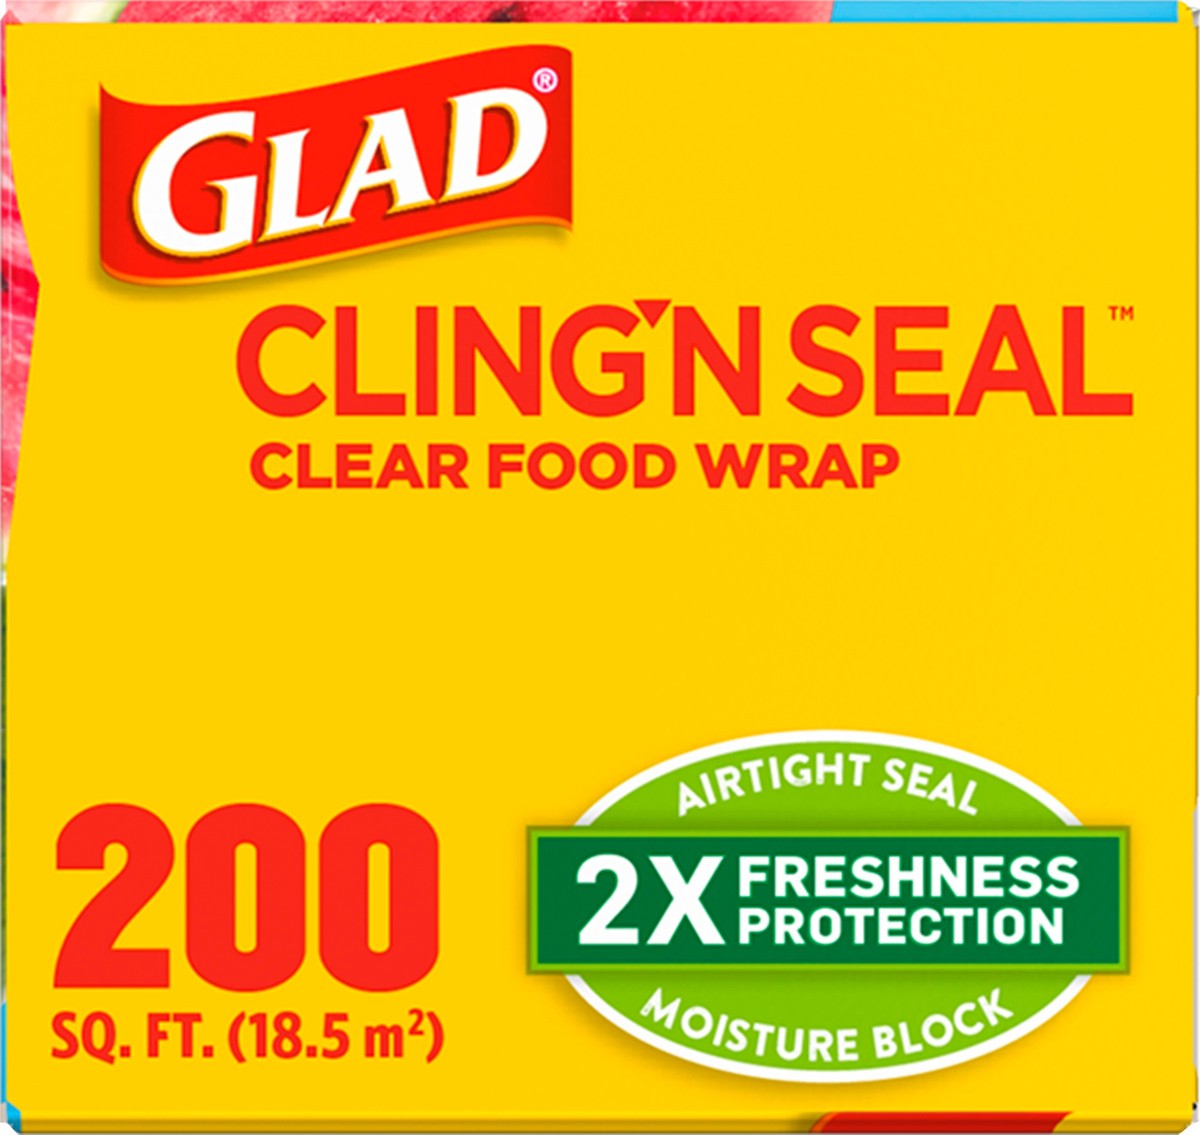 slide 8 of 9, Glad ClingWrap Plastic Wrap - 200 Square Foot Roll, 200 ct